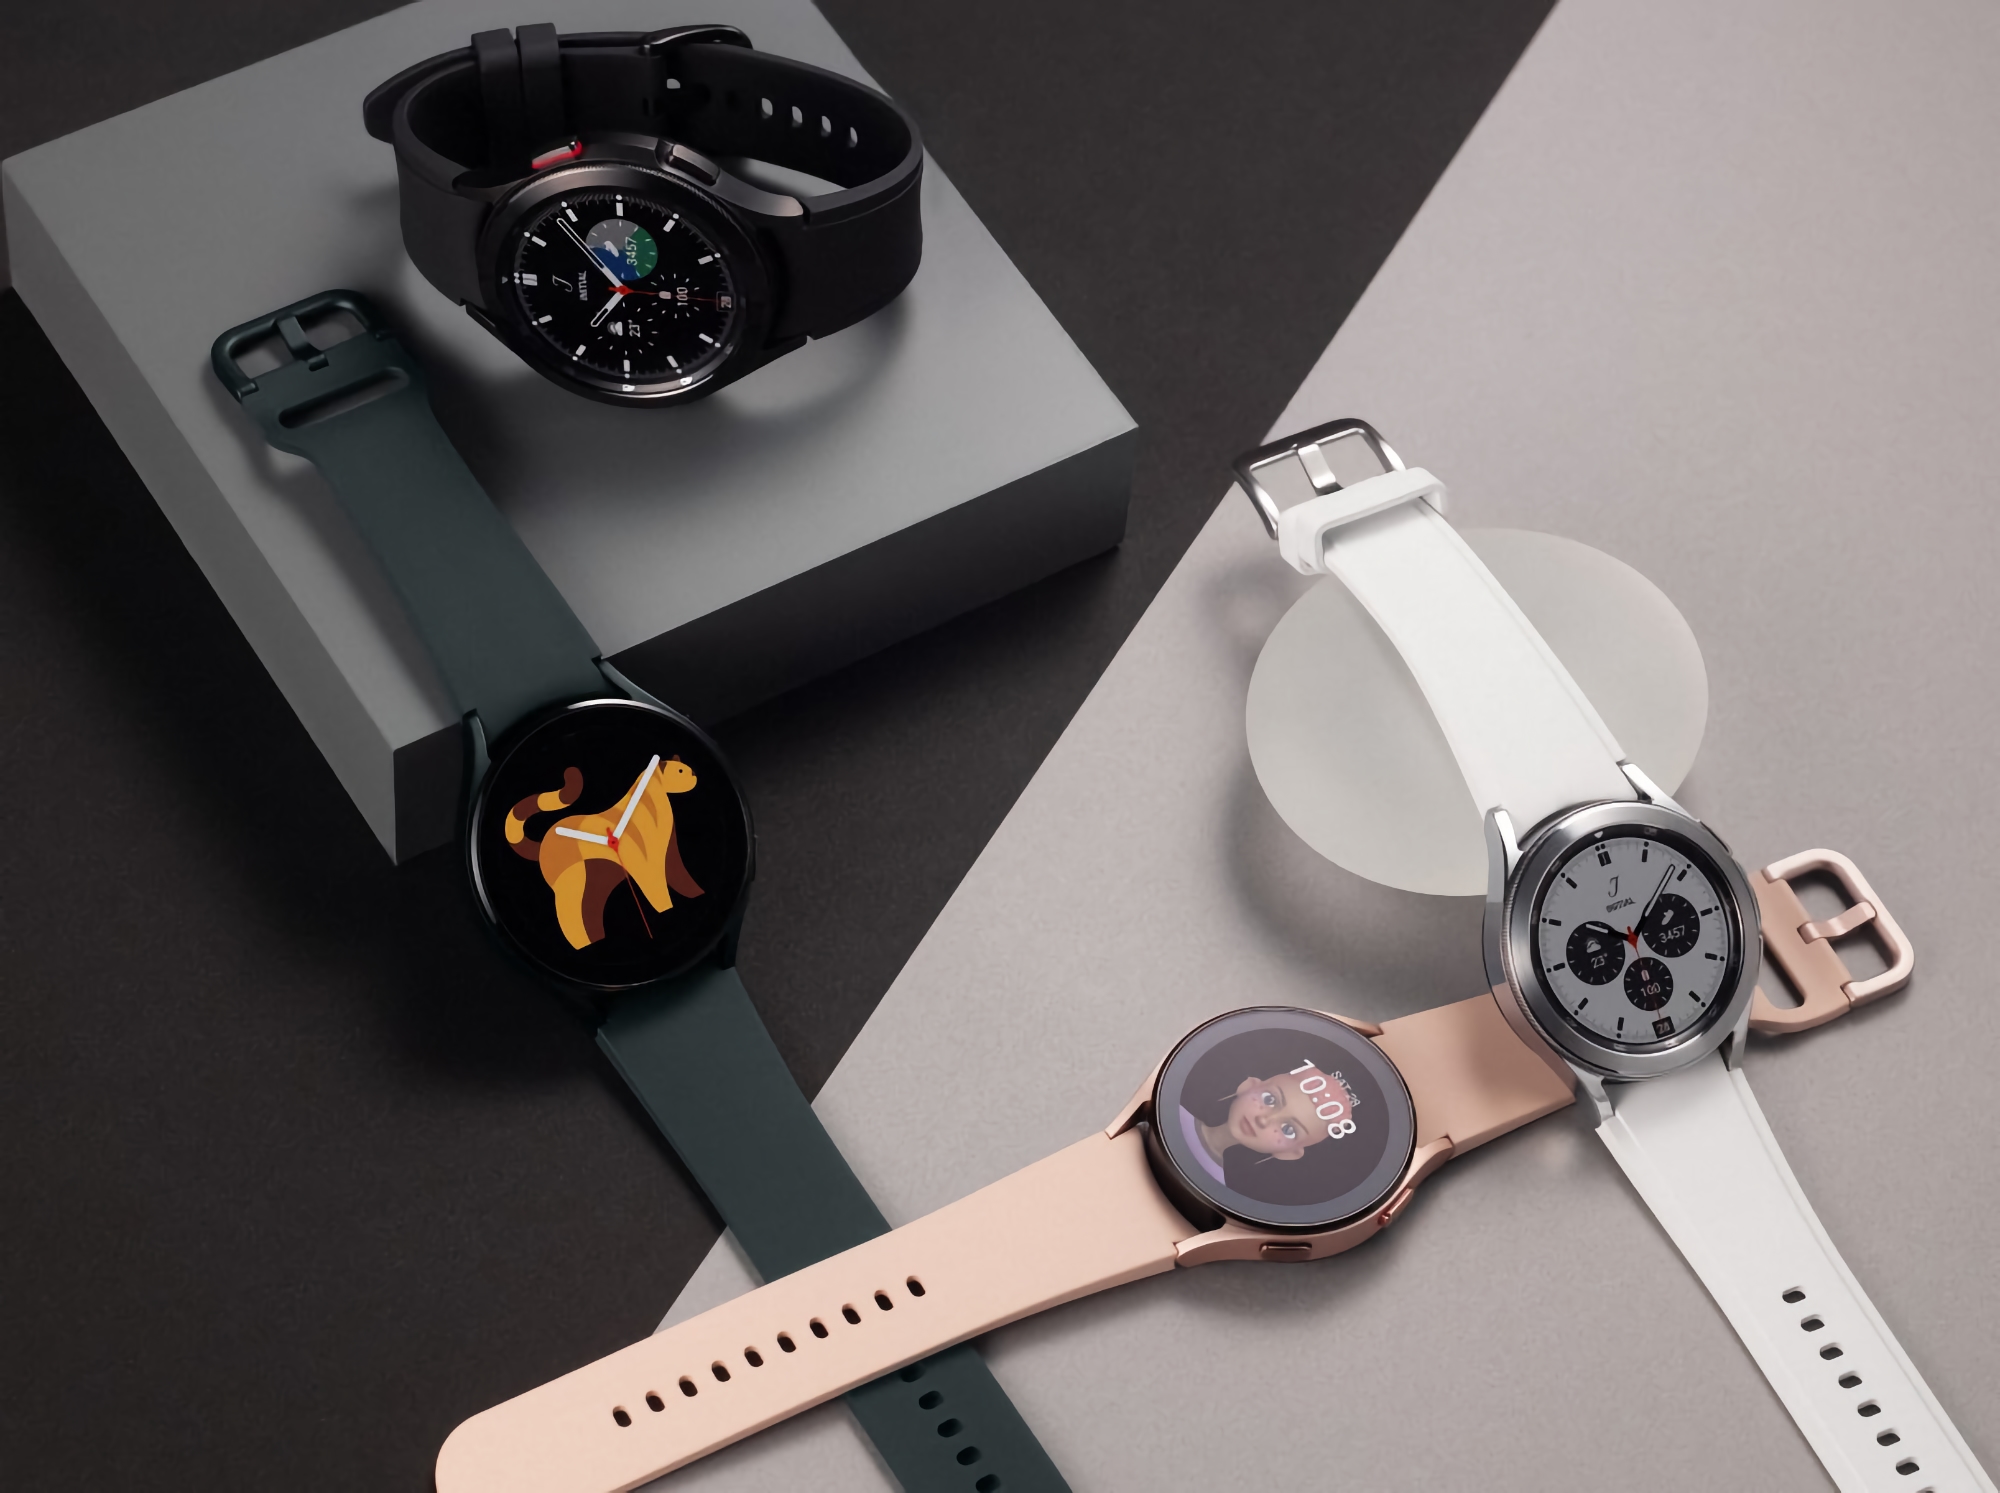 Confirmed: Samsung's new smartwatch will be called the Galaxy Watch 5 and won't get a Classic model